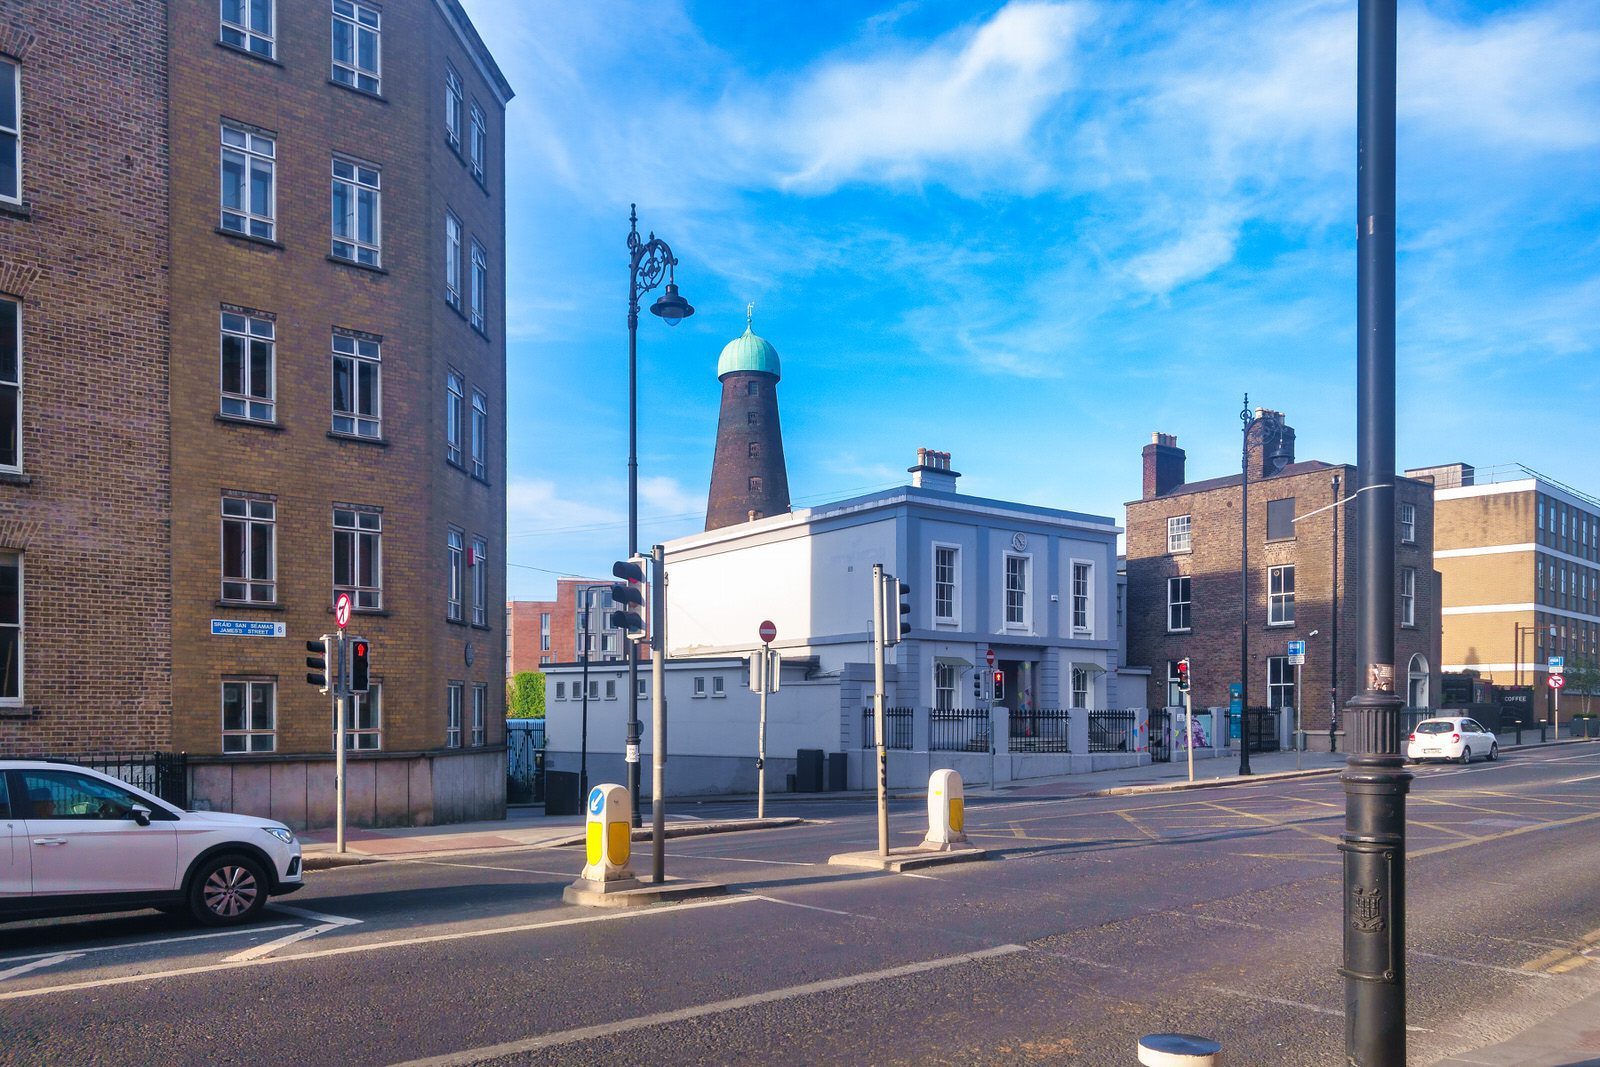 ONCE THE LARGEST SMOCK WINDMILL IN EUROPE [ST PATRICK'S TOWER ON WATLING STREET] 002